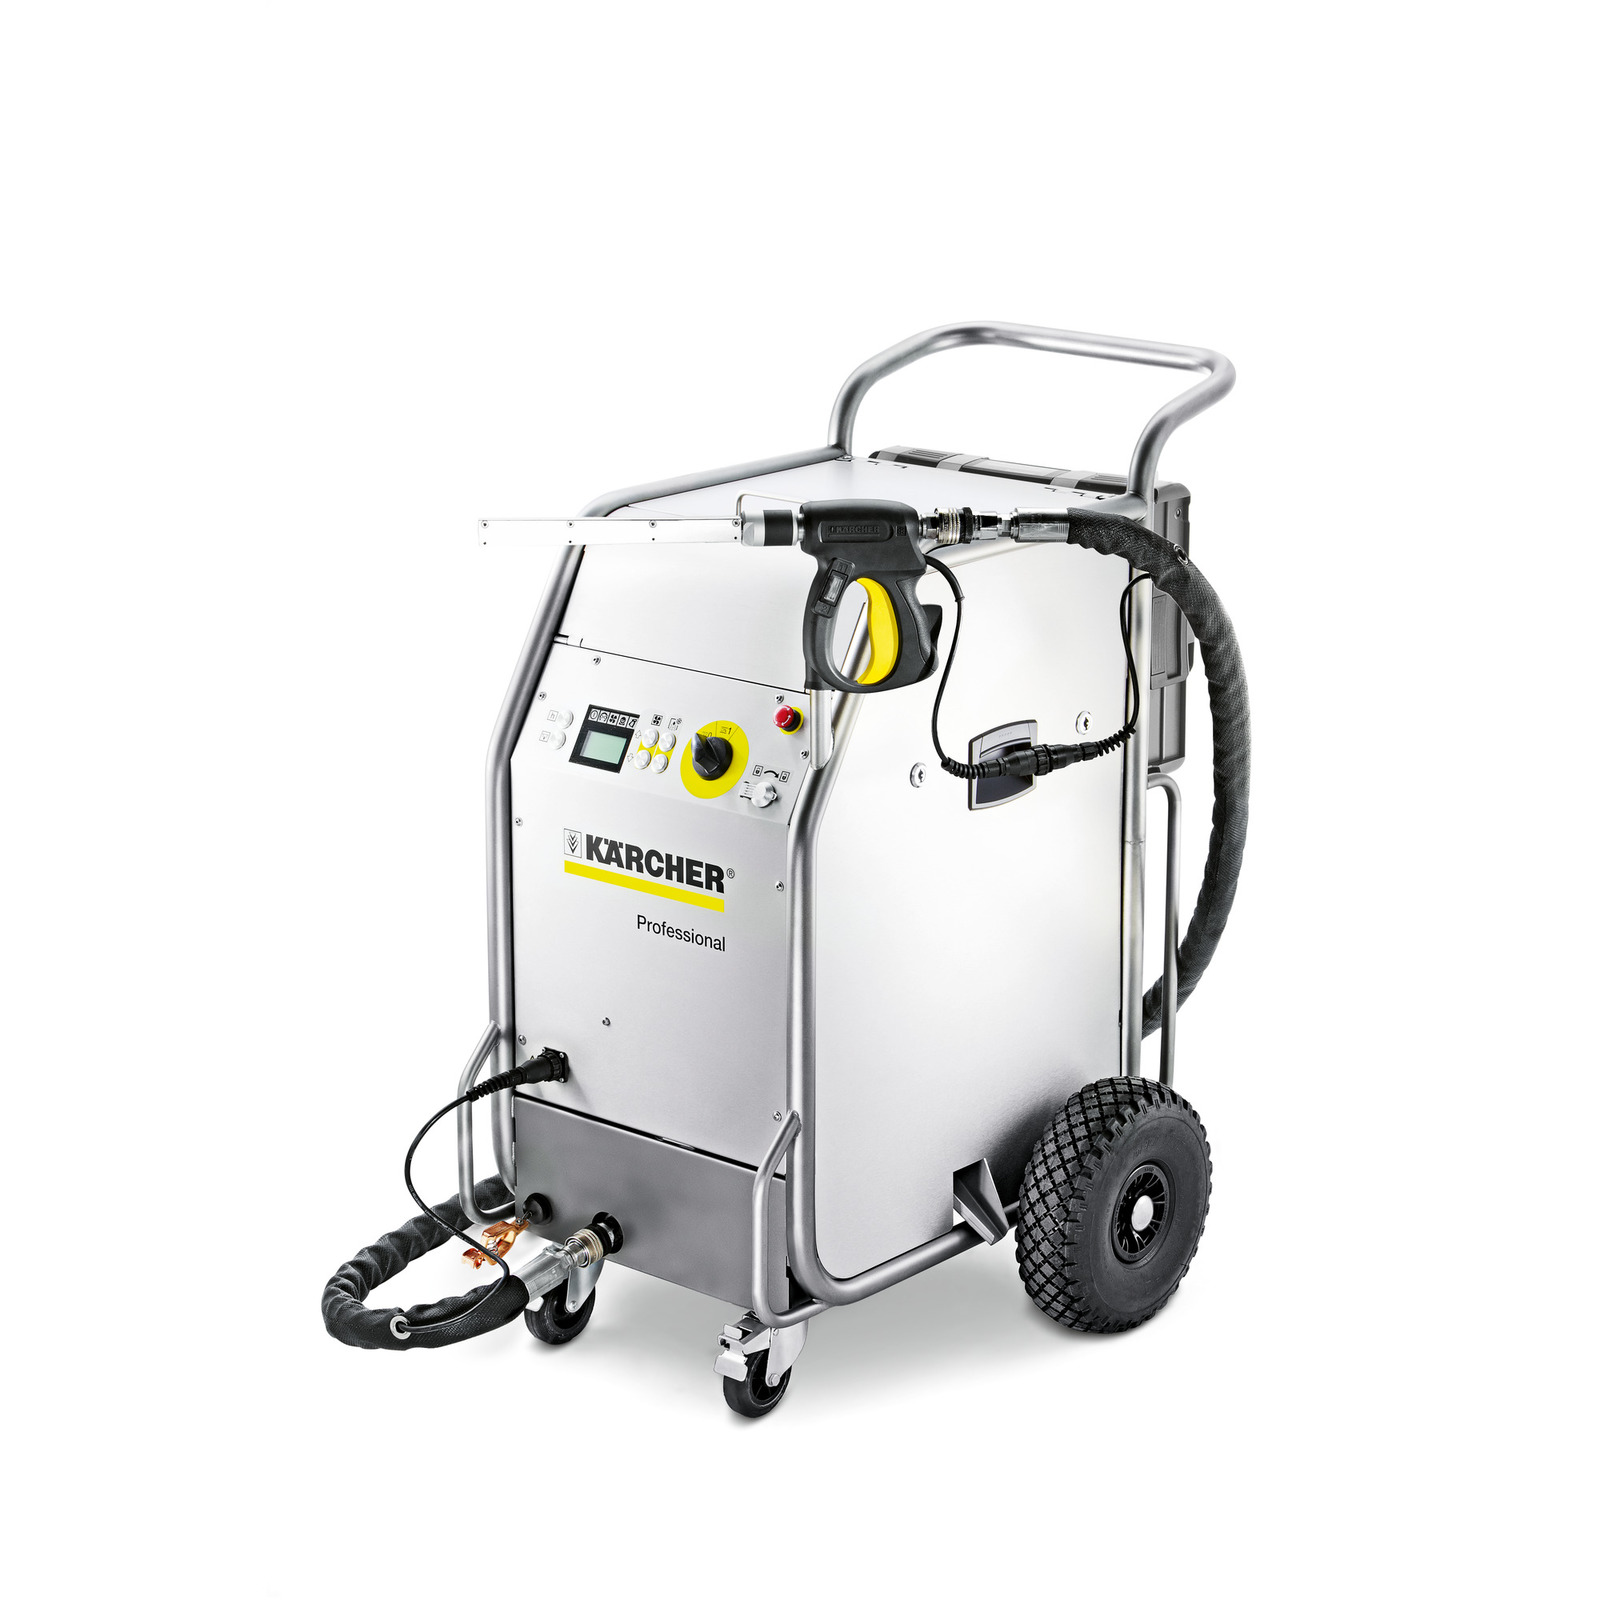  LUTIFIX 110V Dry Ice Blasting Machine,HTS705 Industrial Dry Ice  Blasting Cleaning Machine,Dry Ice Blast Cleaners for Removing All Kinds of  Intractable Dirt Quickly. : Automotive